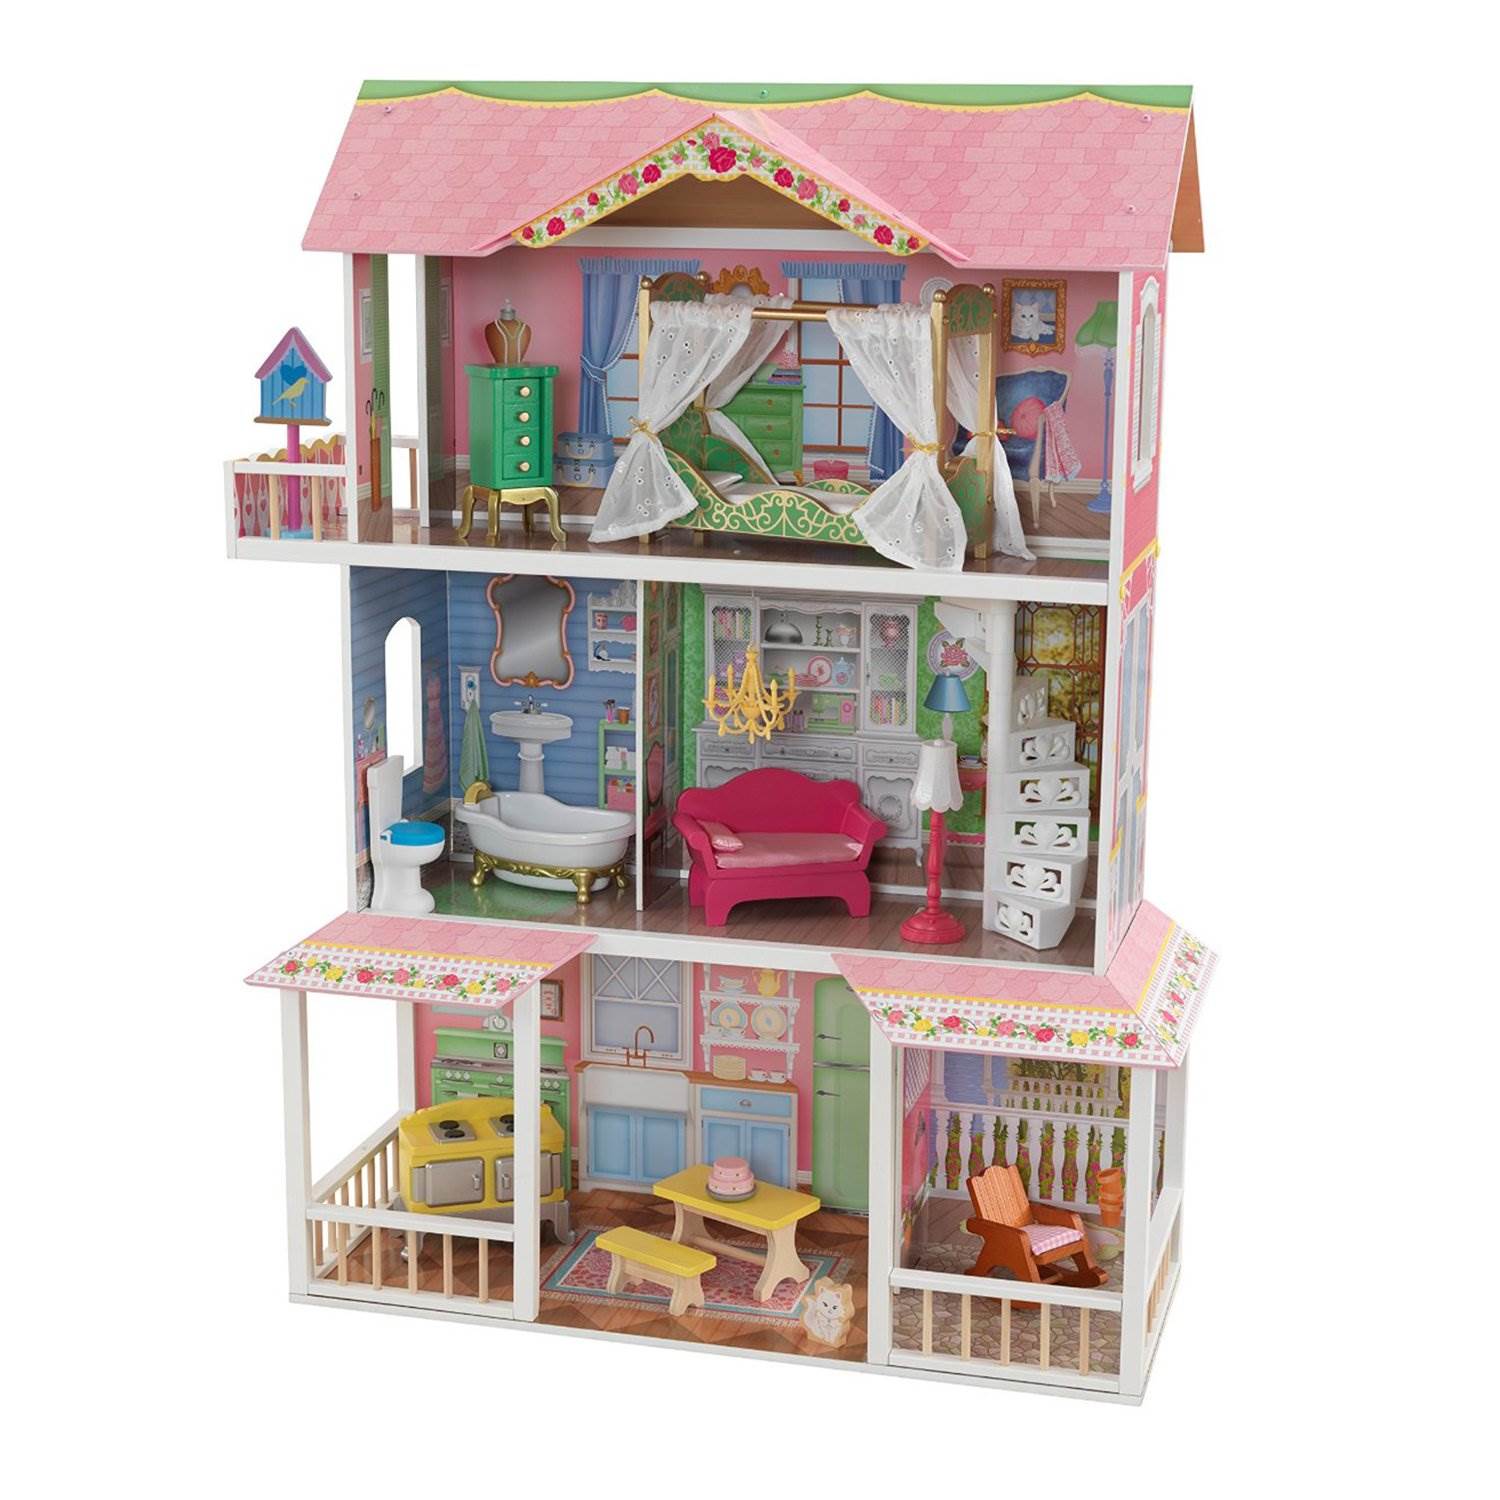 KidKraft Sweet Savannah Wooden Pretend Play House Doll Dollhouse with Furniture - image 1 of 10